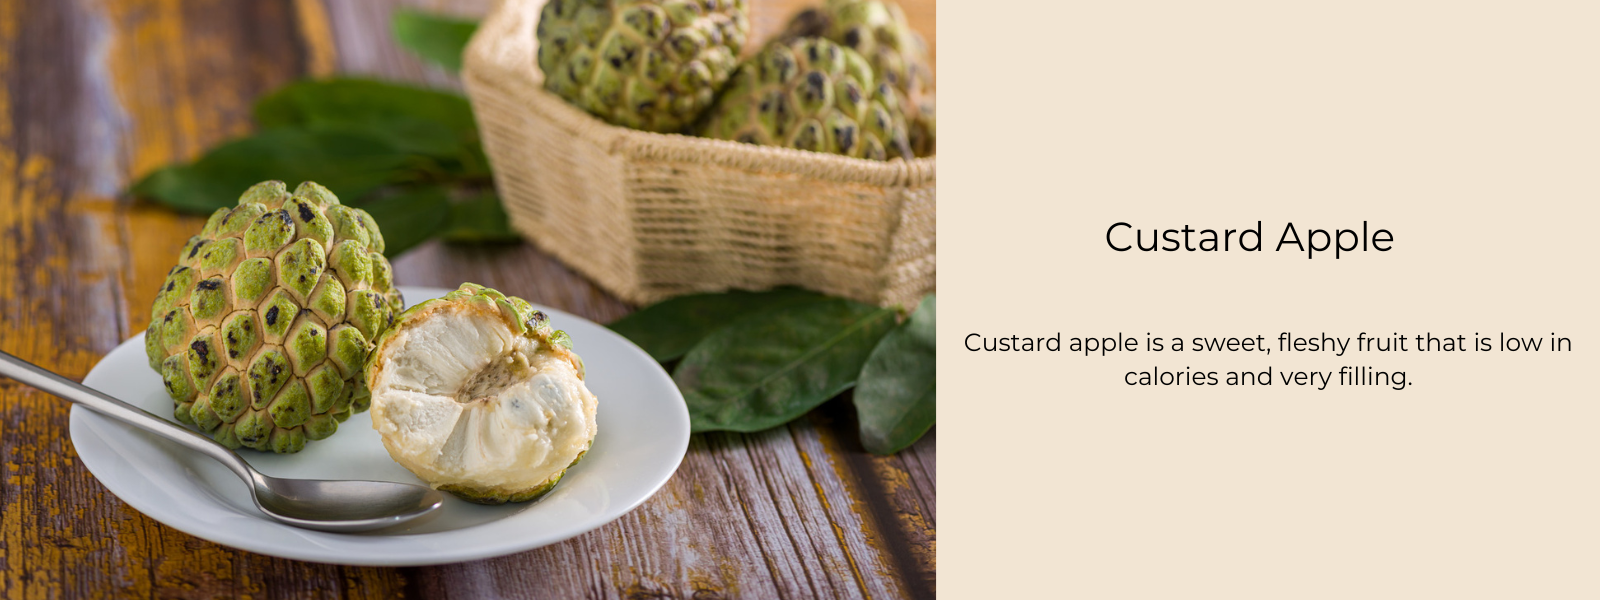 Custard Apple - Health Benefits, Uses and Important Facts